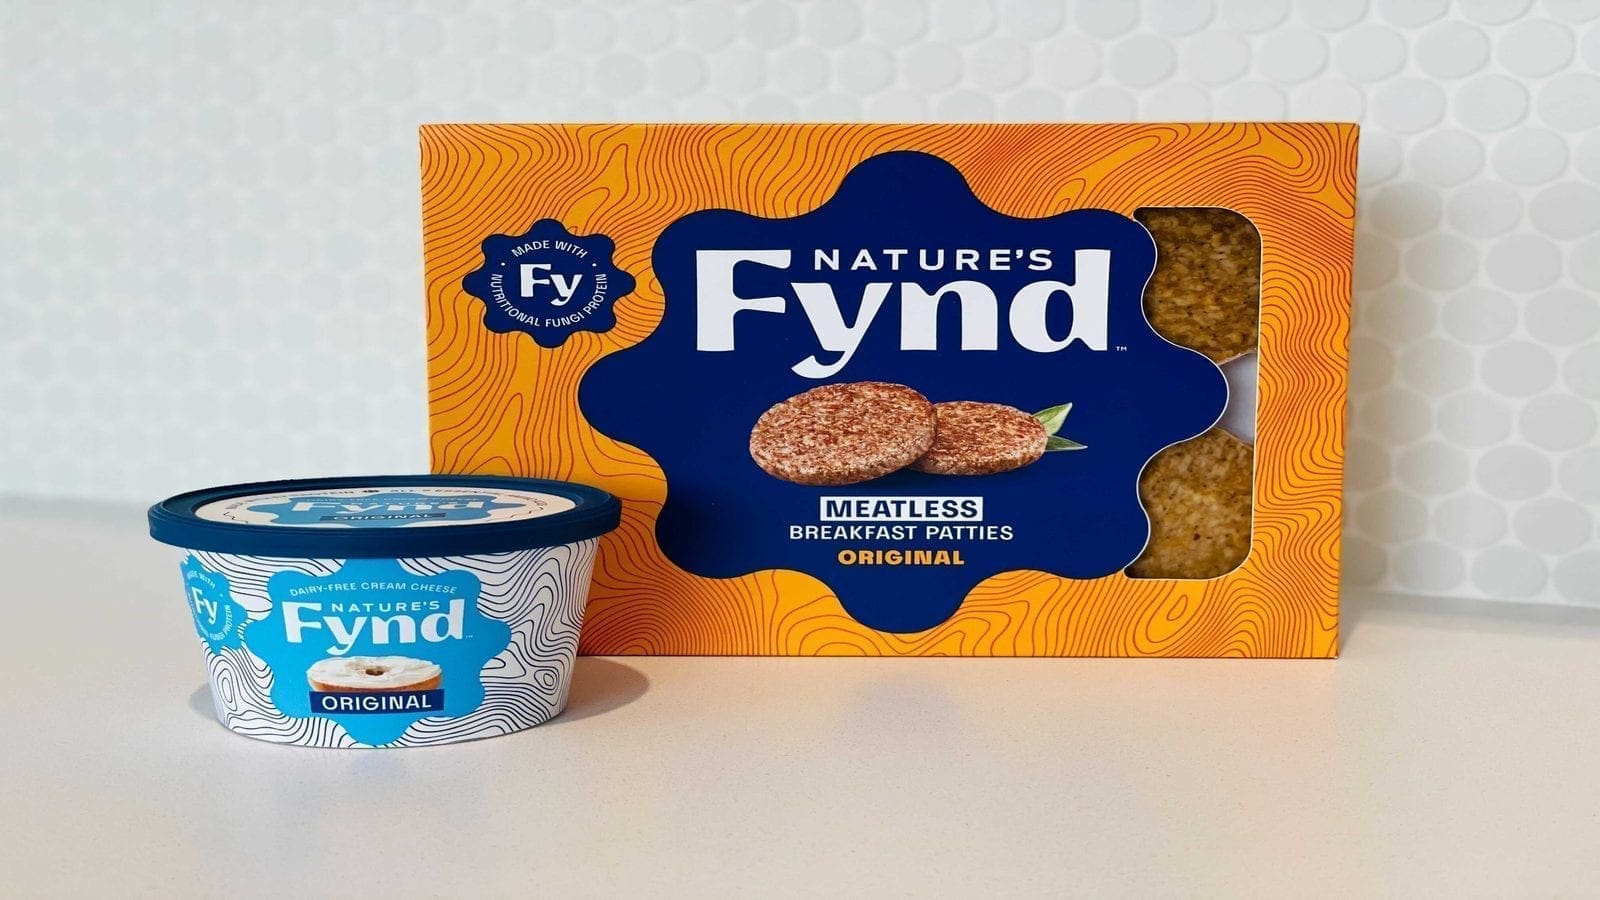 Alternative protein company Nature’s Fynd raises US$350m to accelerate go-to-market strategy